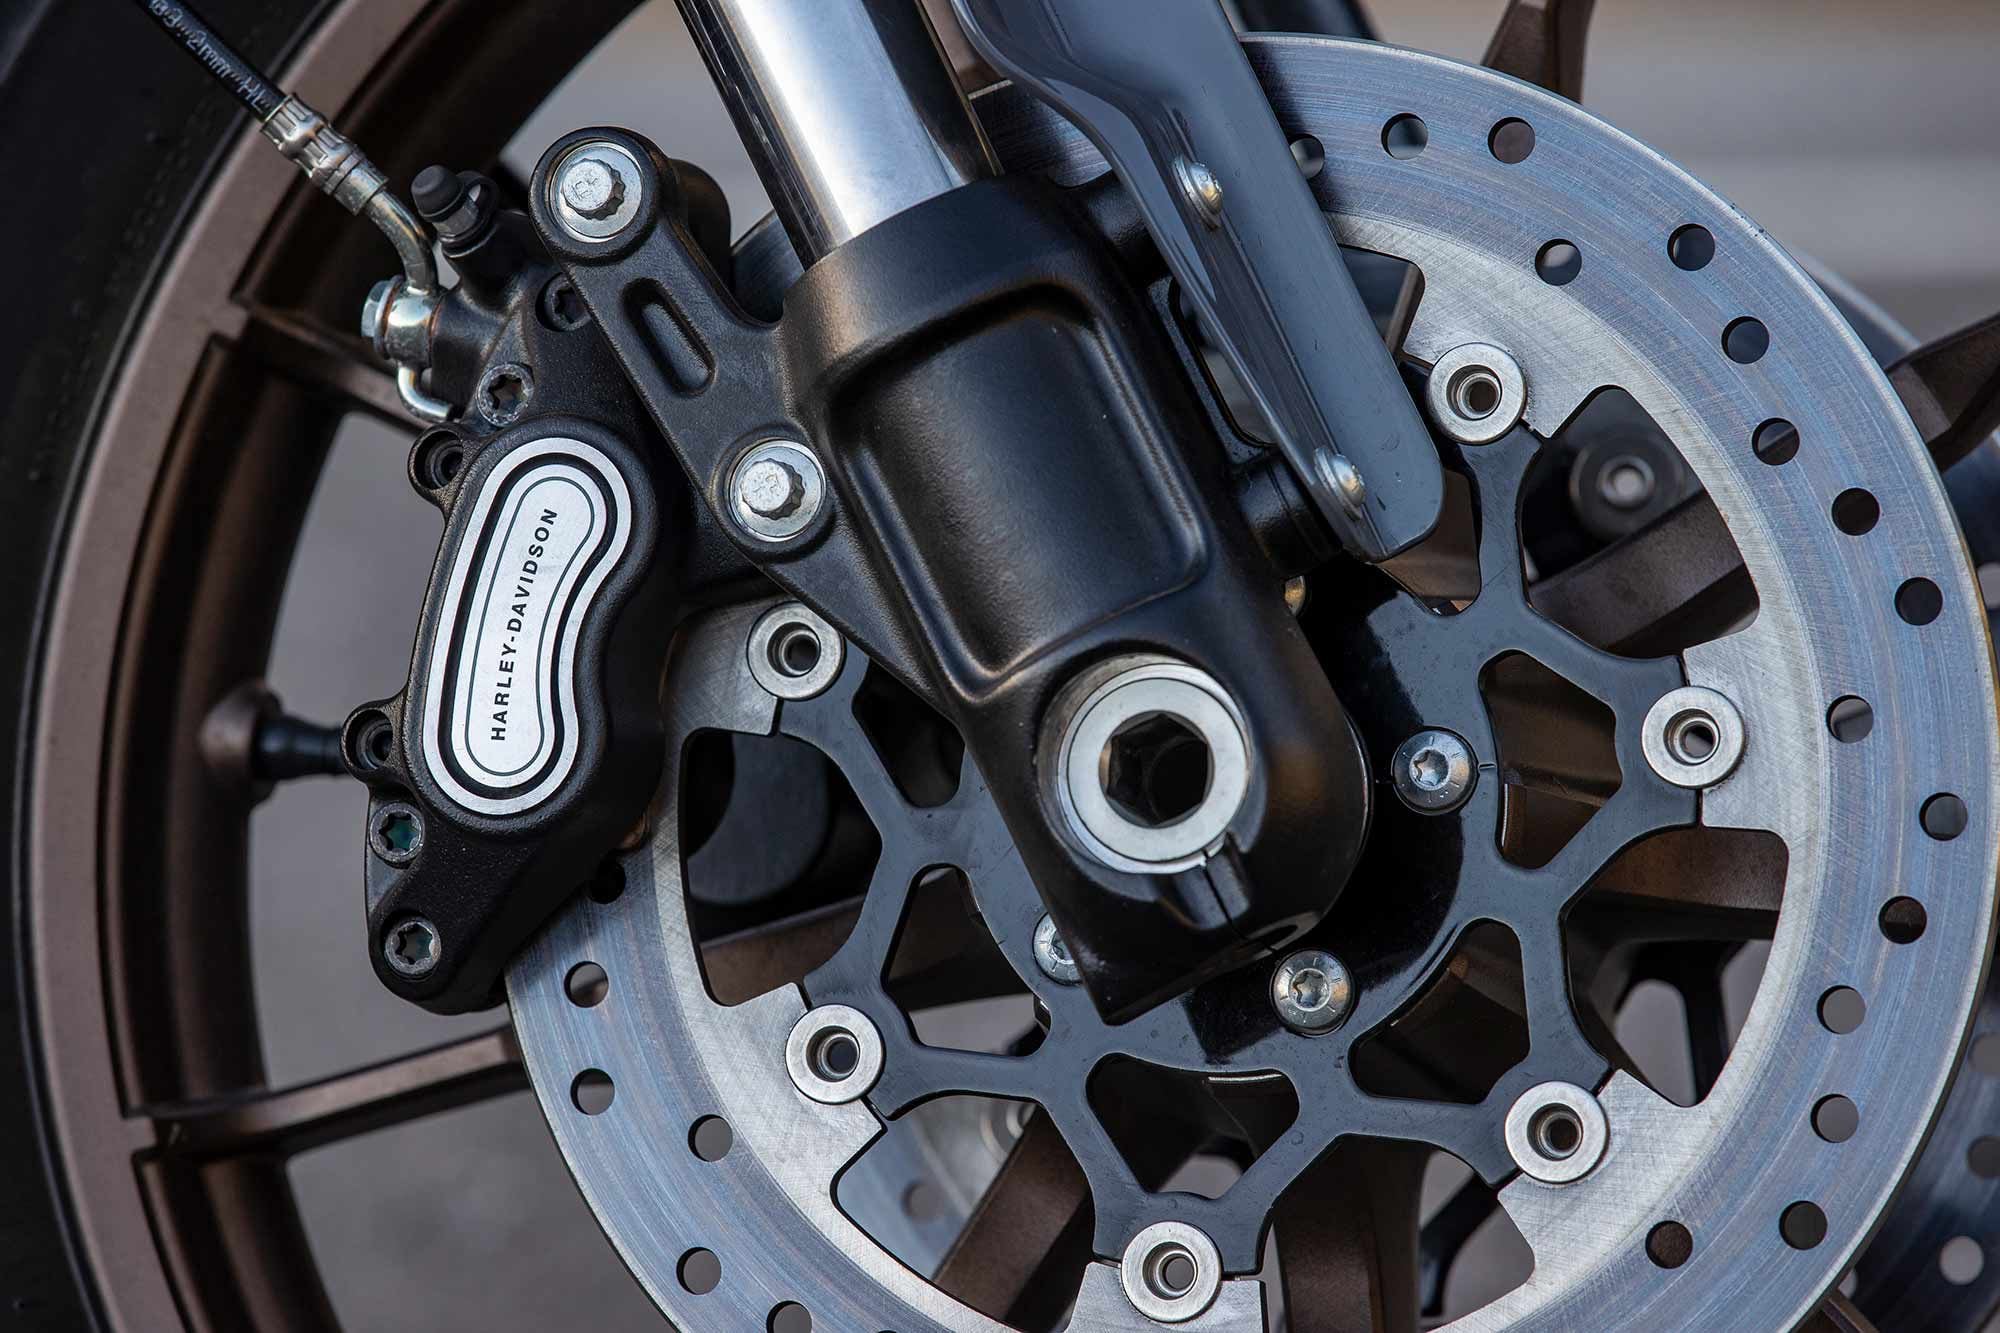 Braking equipment remains unchanged from the previous Low Rider S model, with dual four-piston calipers on 300mm discs.